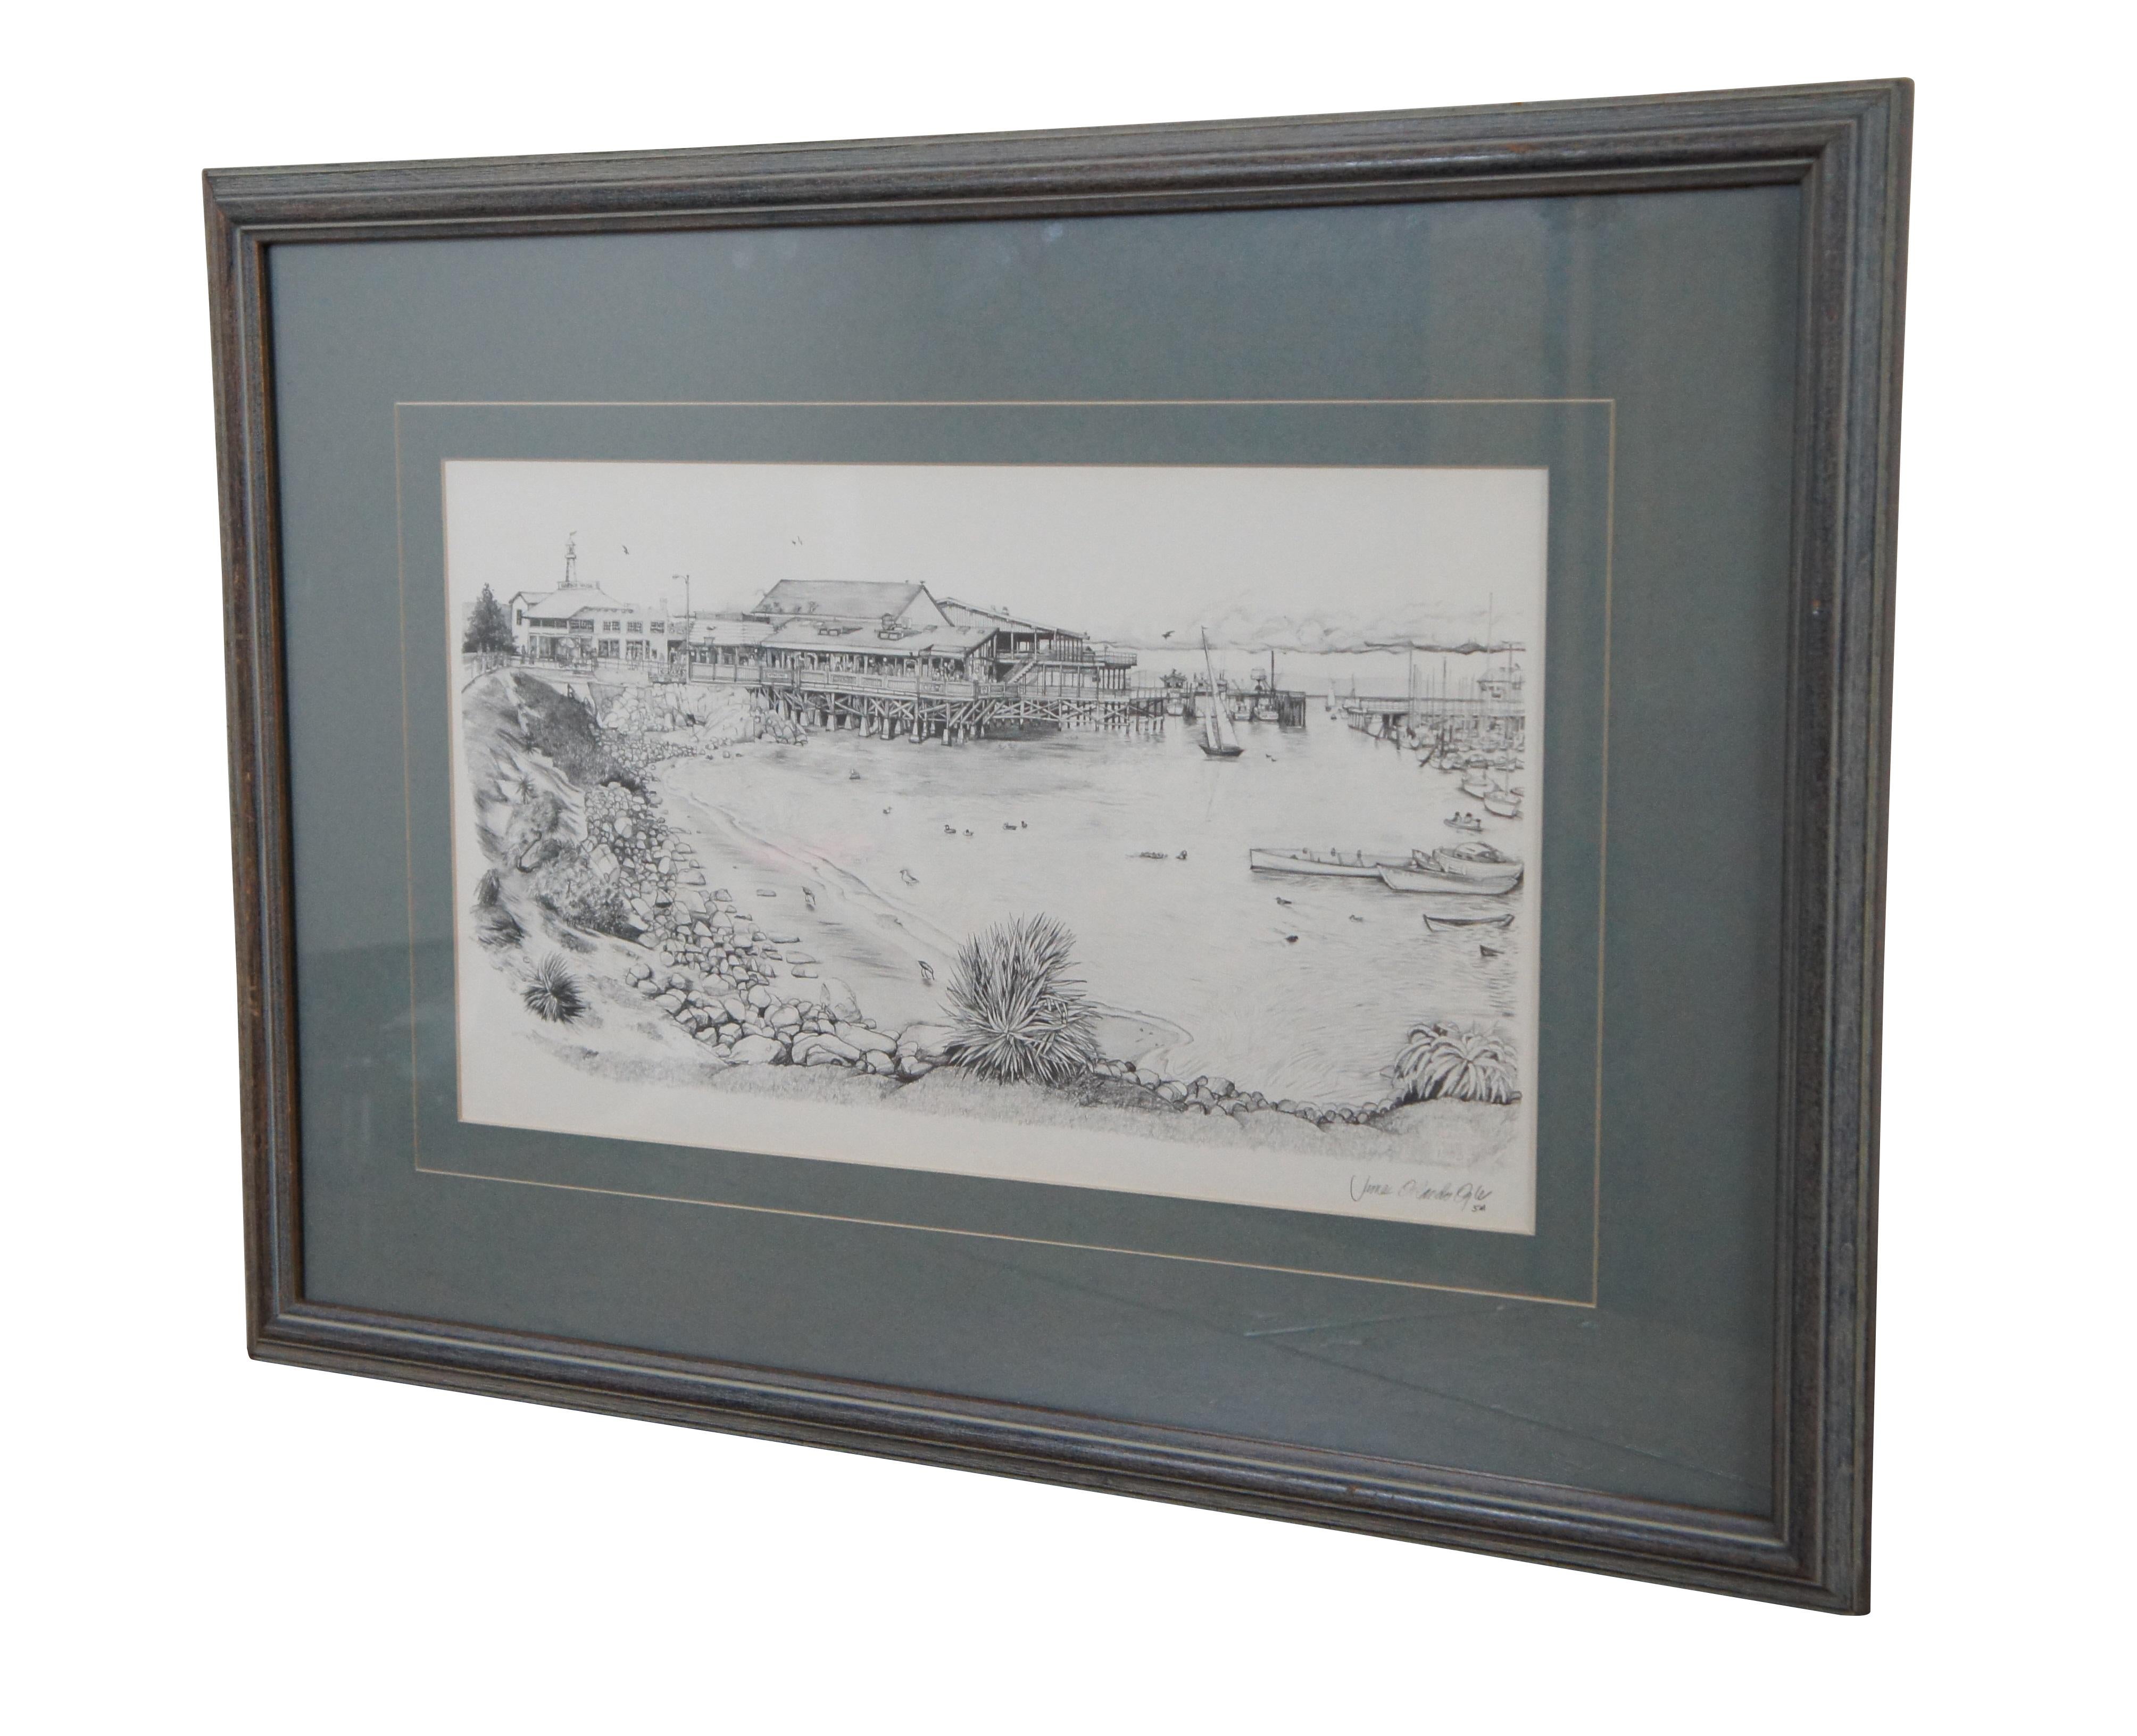 Vintage black and white lithograph print of a 1983 drawing by James Orlando Ogle of Monterey Bay’s Harbor House, Cannery Row, Monterey California. Signed in plate. Professionally matted and framed under glass.

Dimensions:
23.25